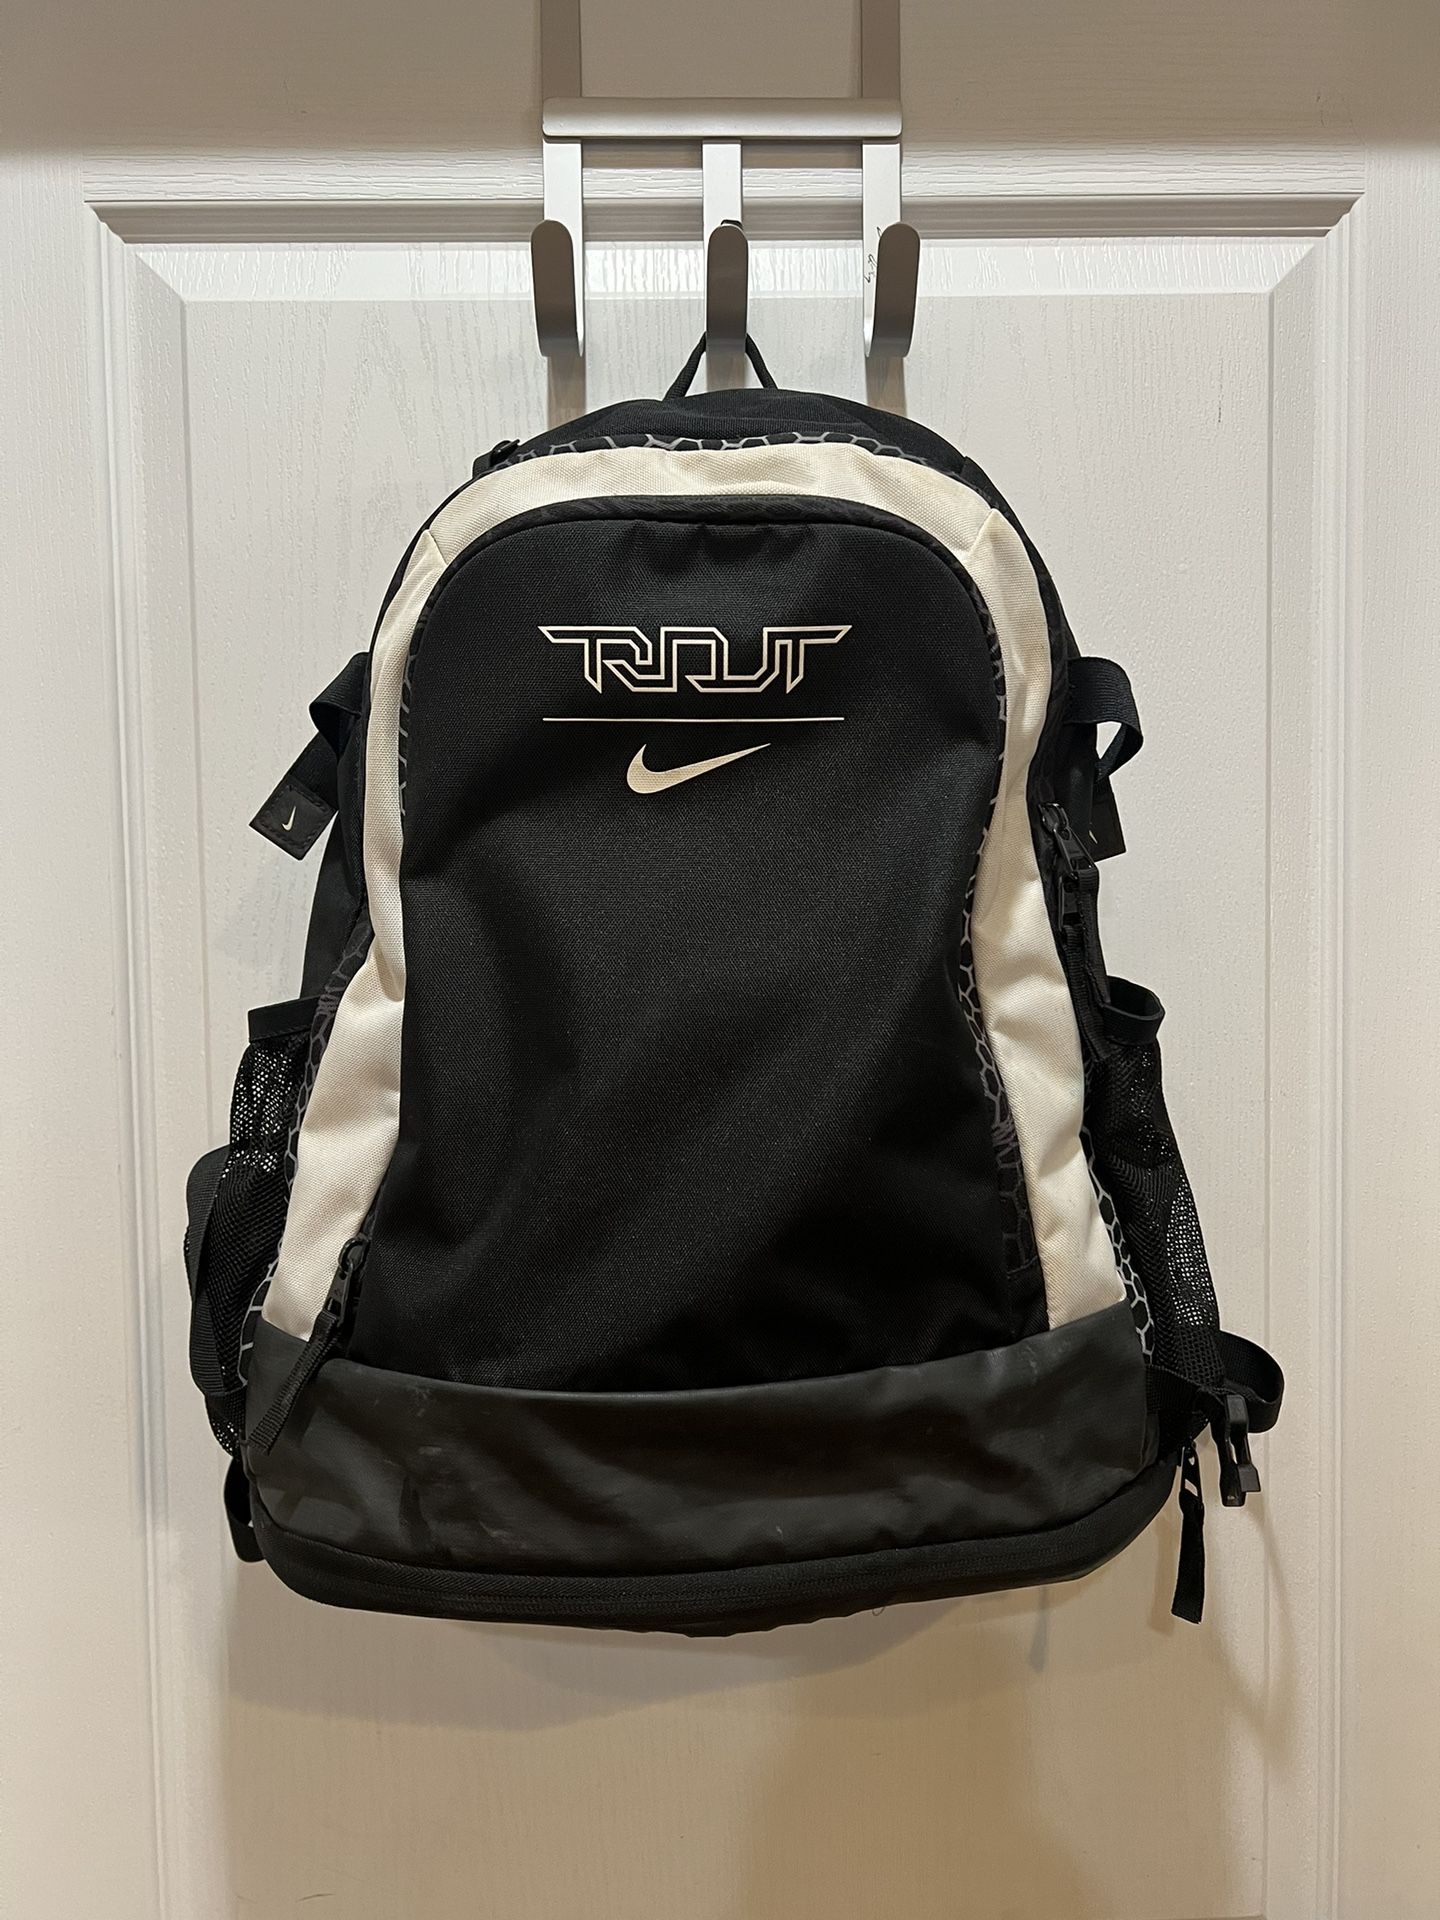 NIKE Trout Vapor Baseball Backpack BA5436-011 18"x12"x 6" (Good condition) PICK UP IN CORNELIUS